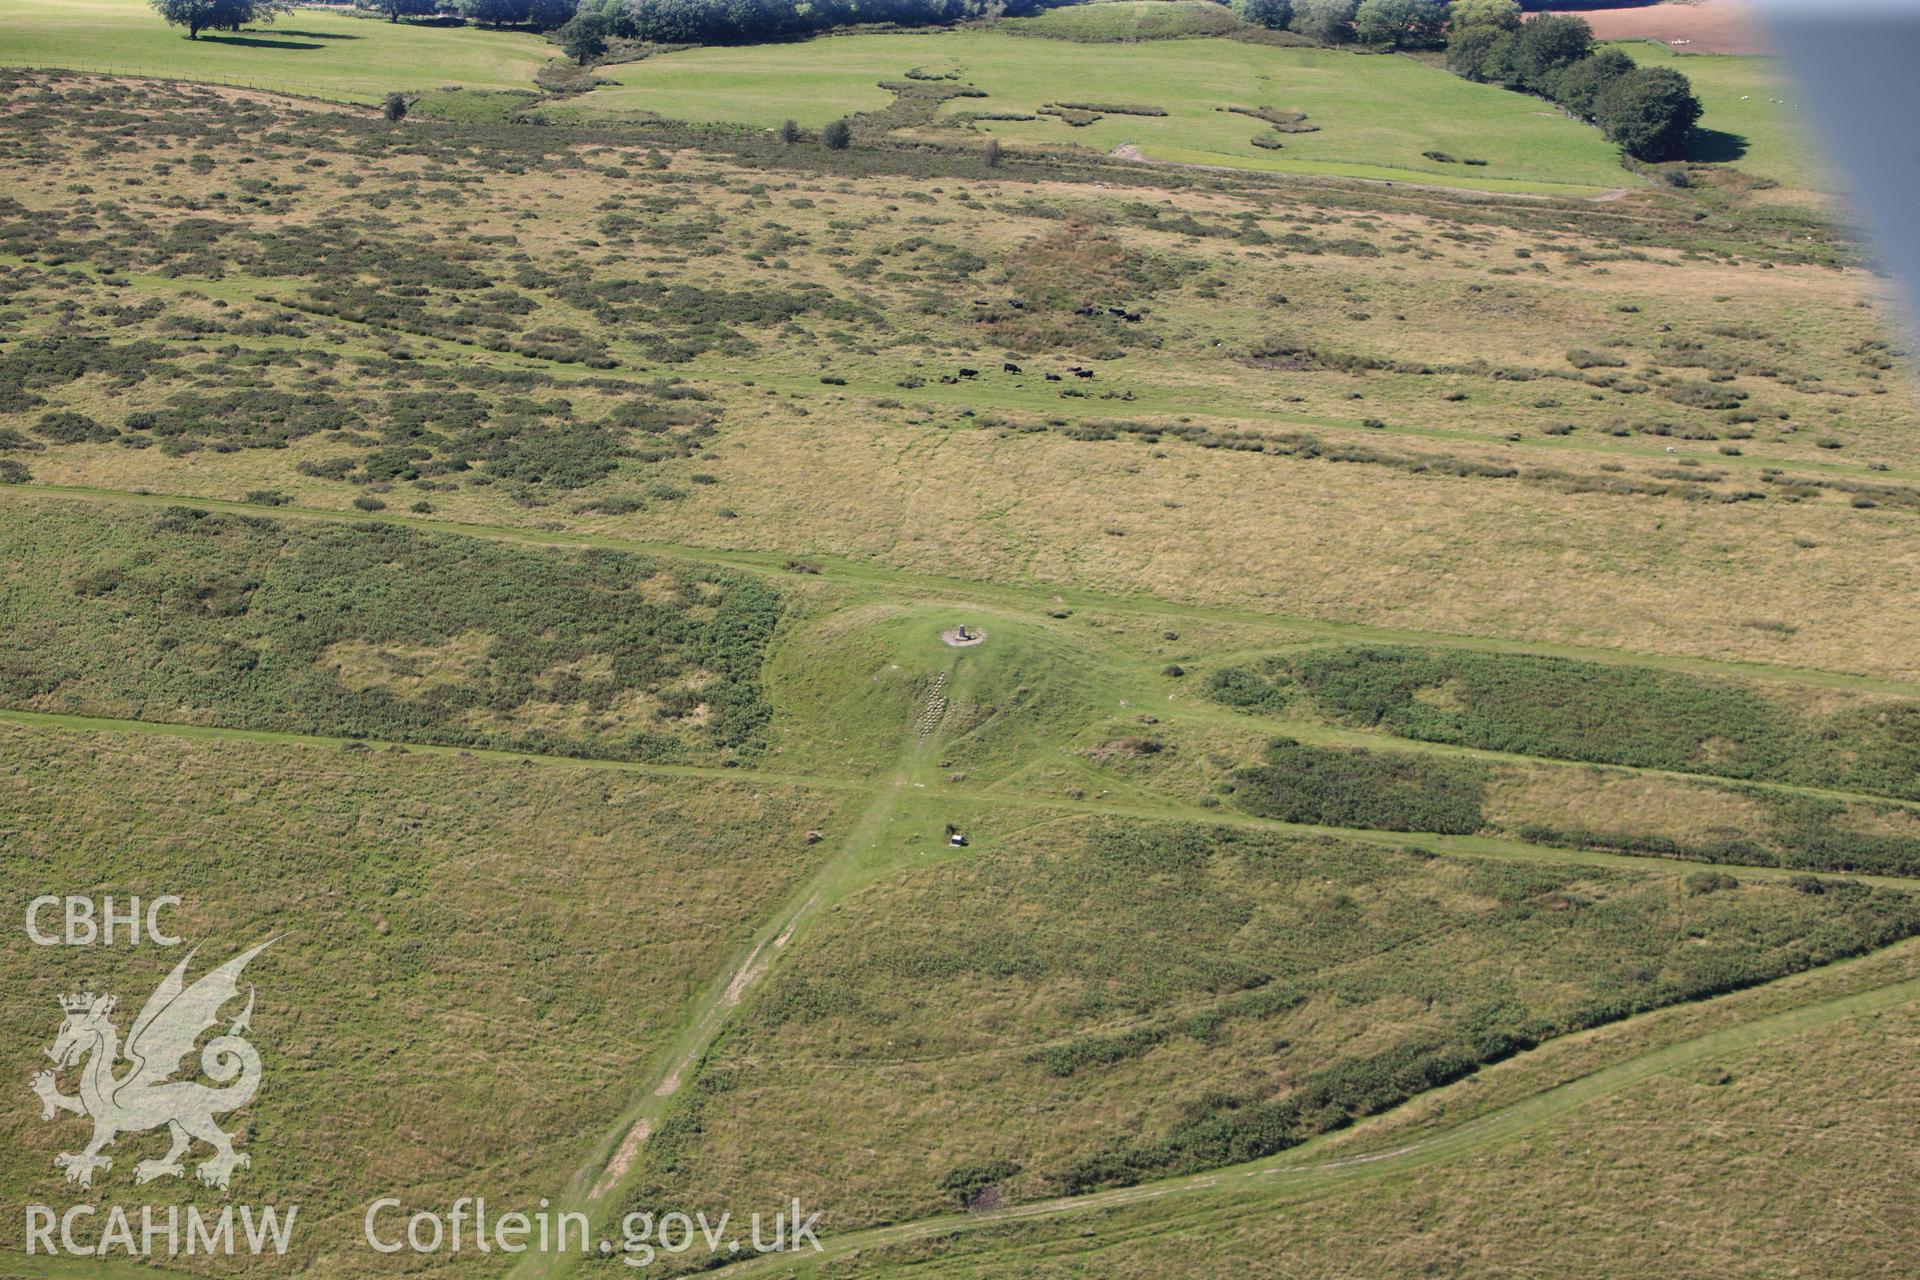 RCAHMW colour oblique photograph of Garth Hill Barrow I. Taken by Toby Driver on 24/07/2012.